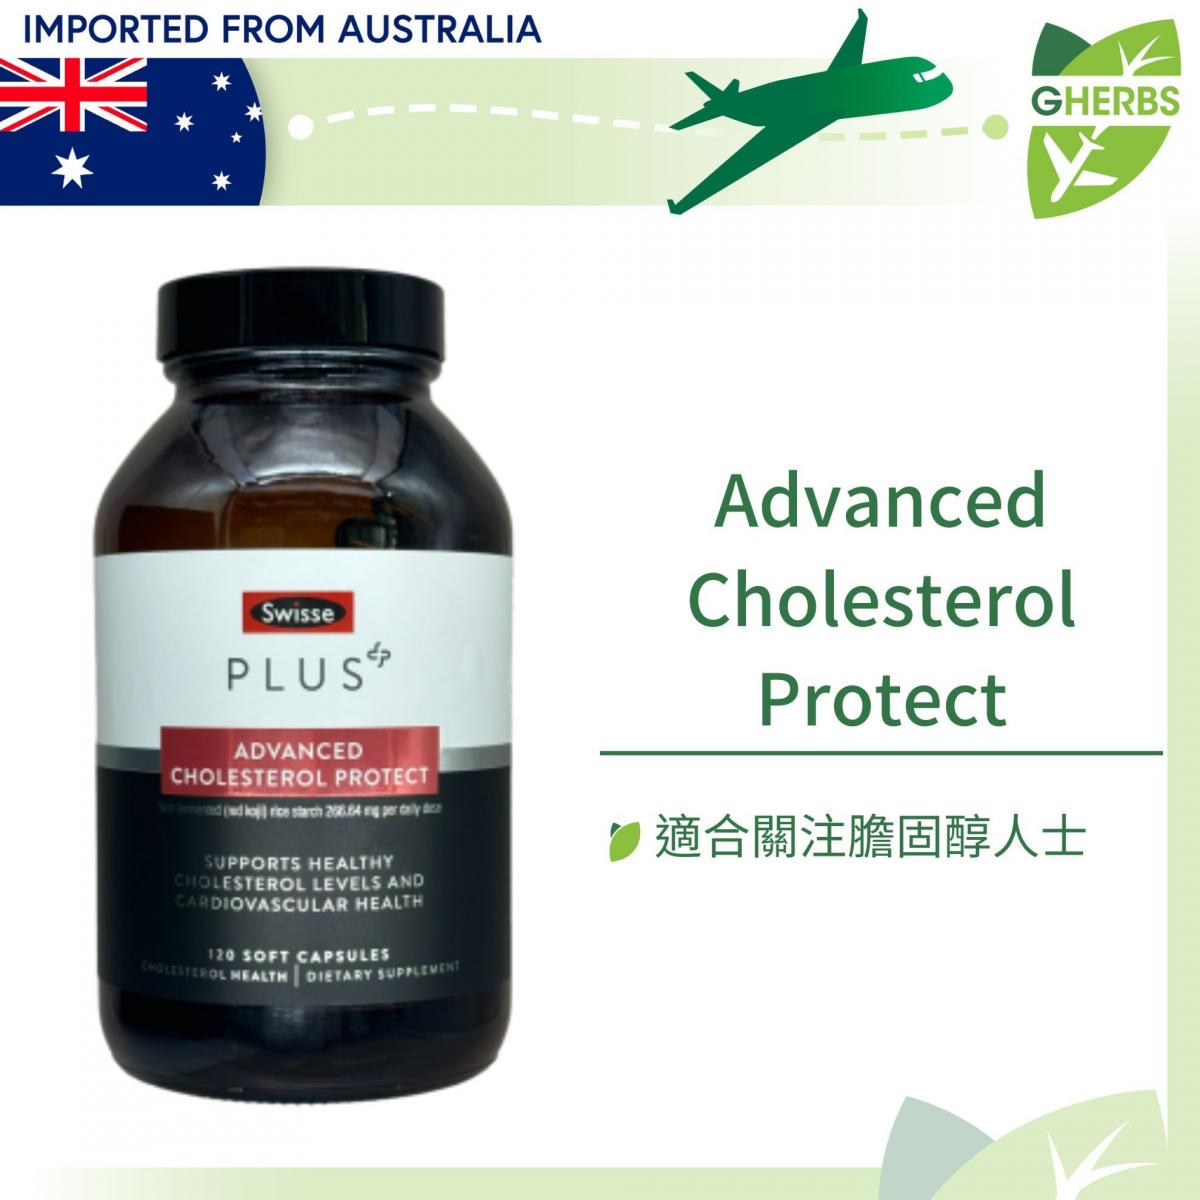 Plus+ Advanced Cholesterol Protect 120 soft capsules【Parallel import】【Best Before:11/2024】